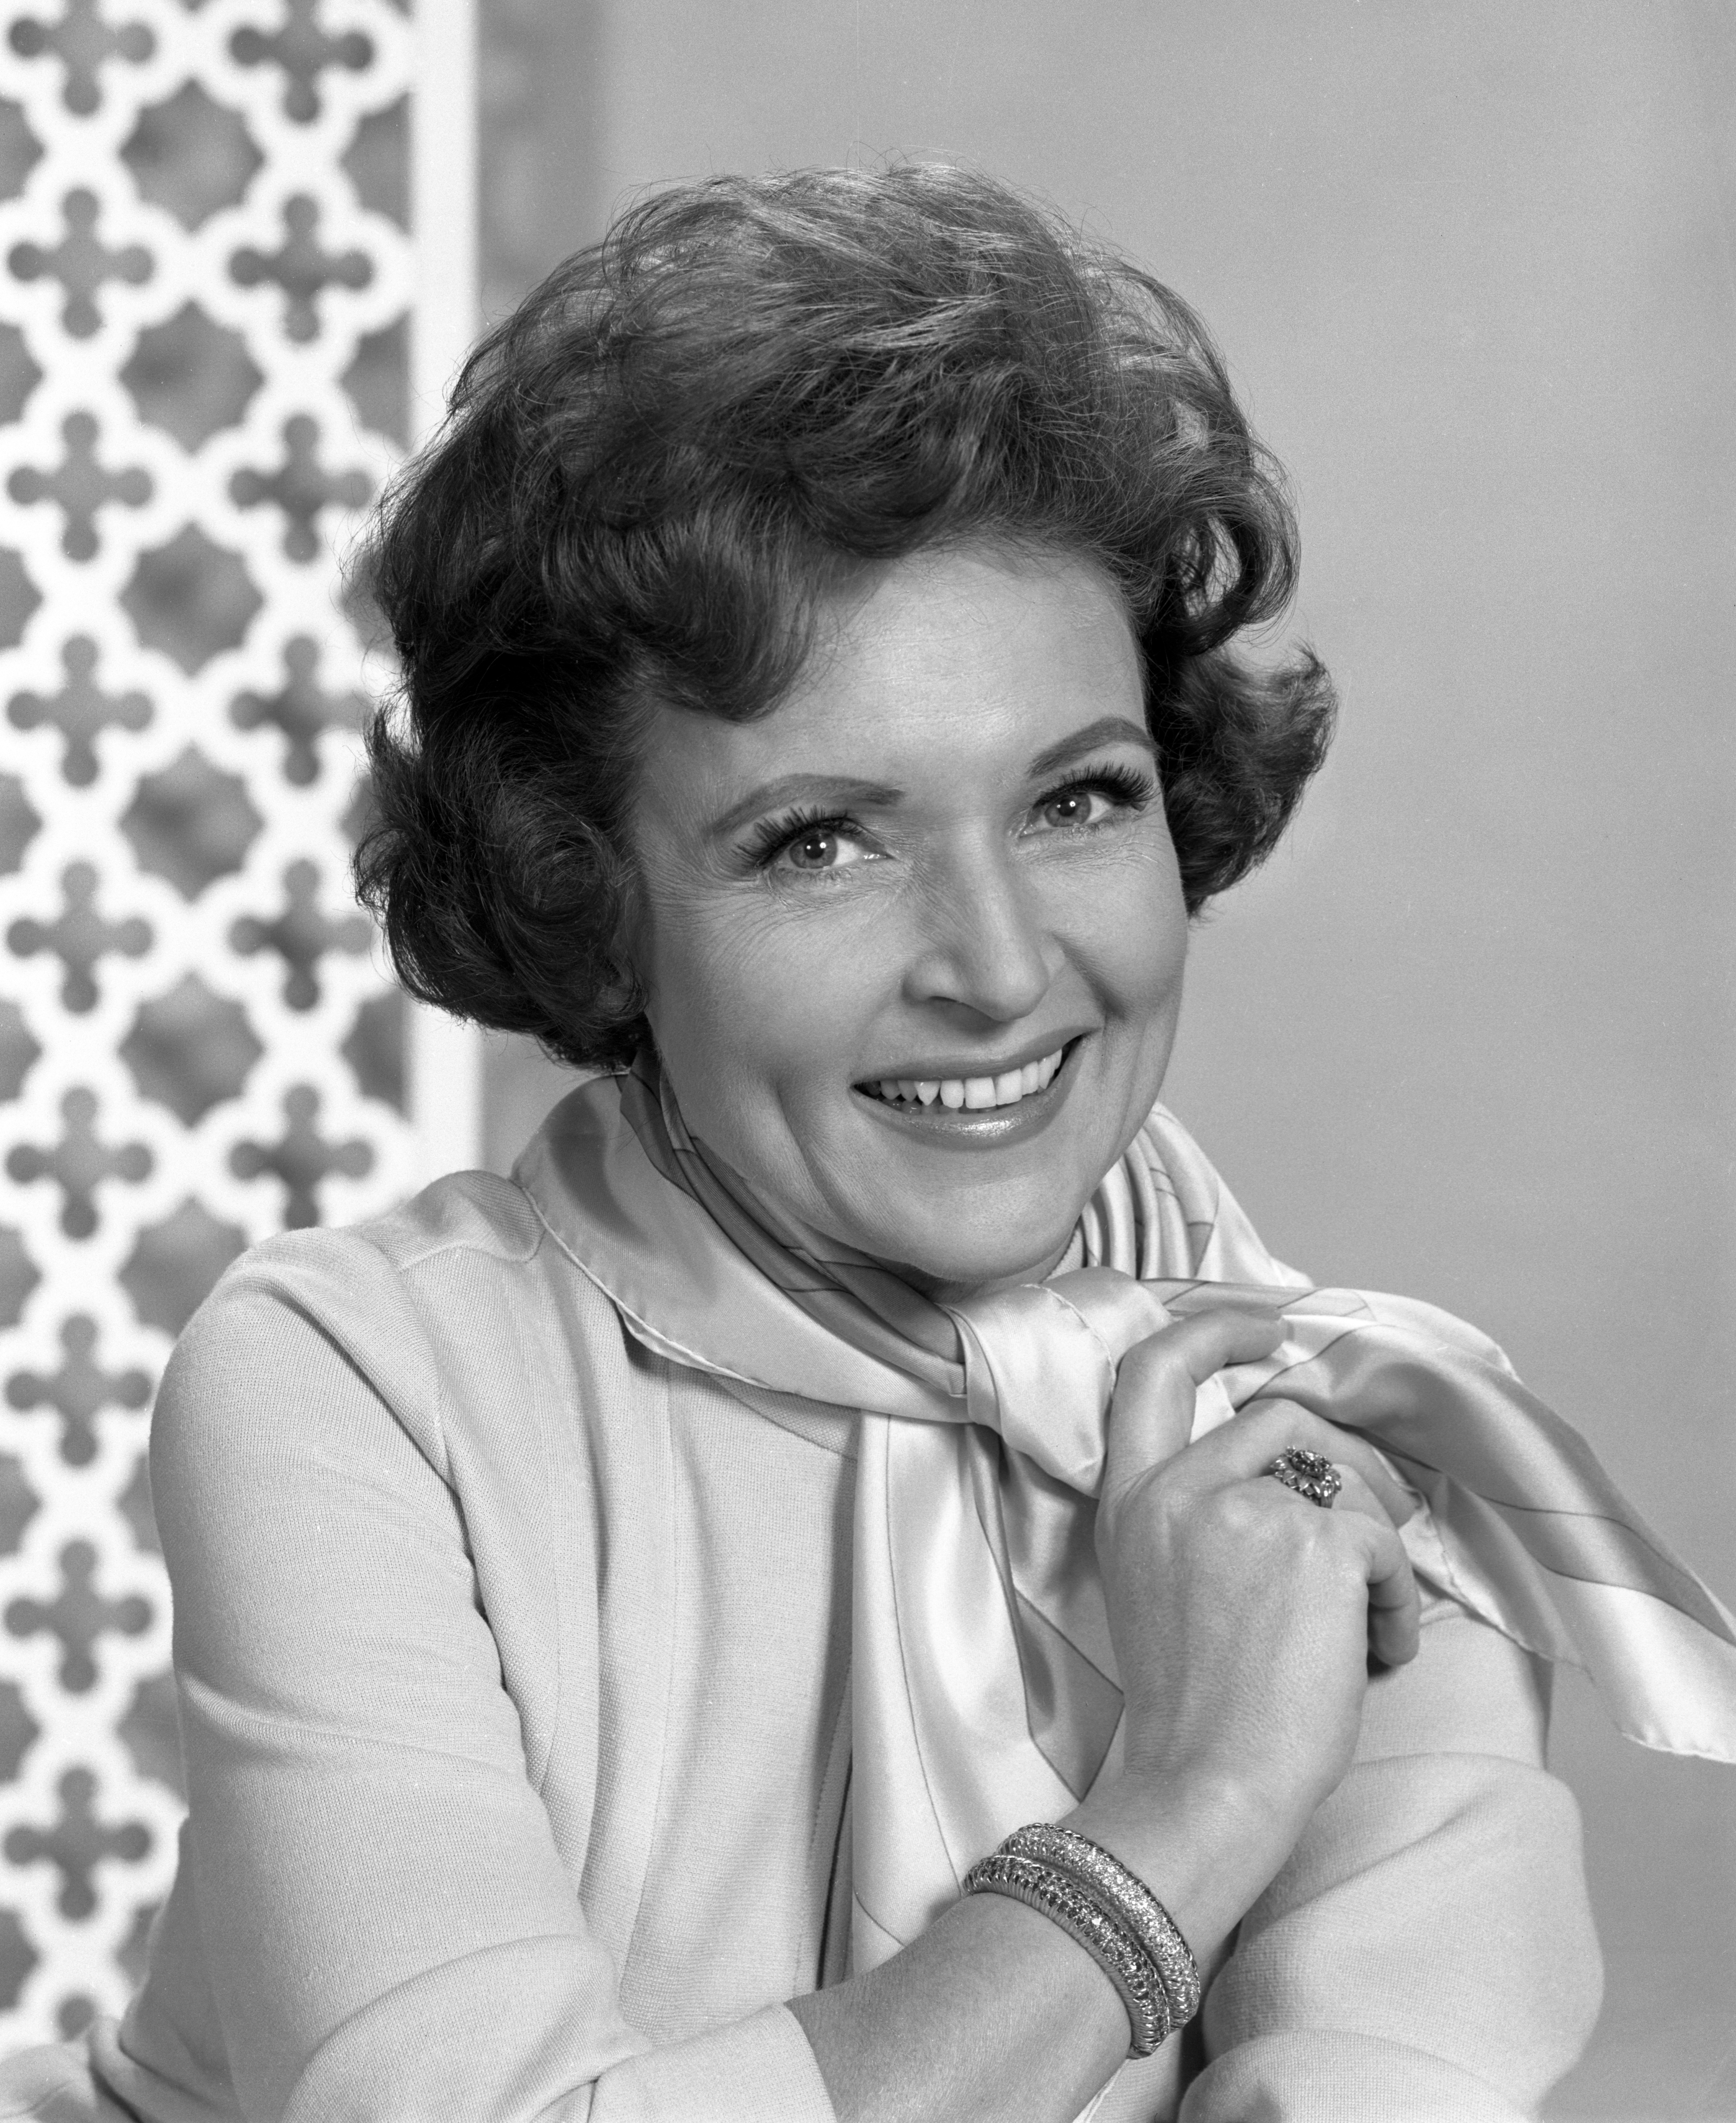 Betty White smiles, wearing a light scarf and a bracelet